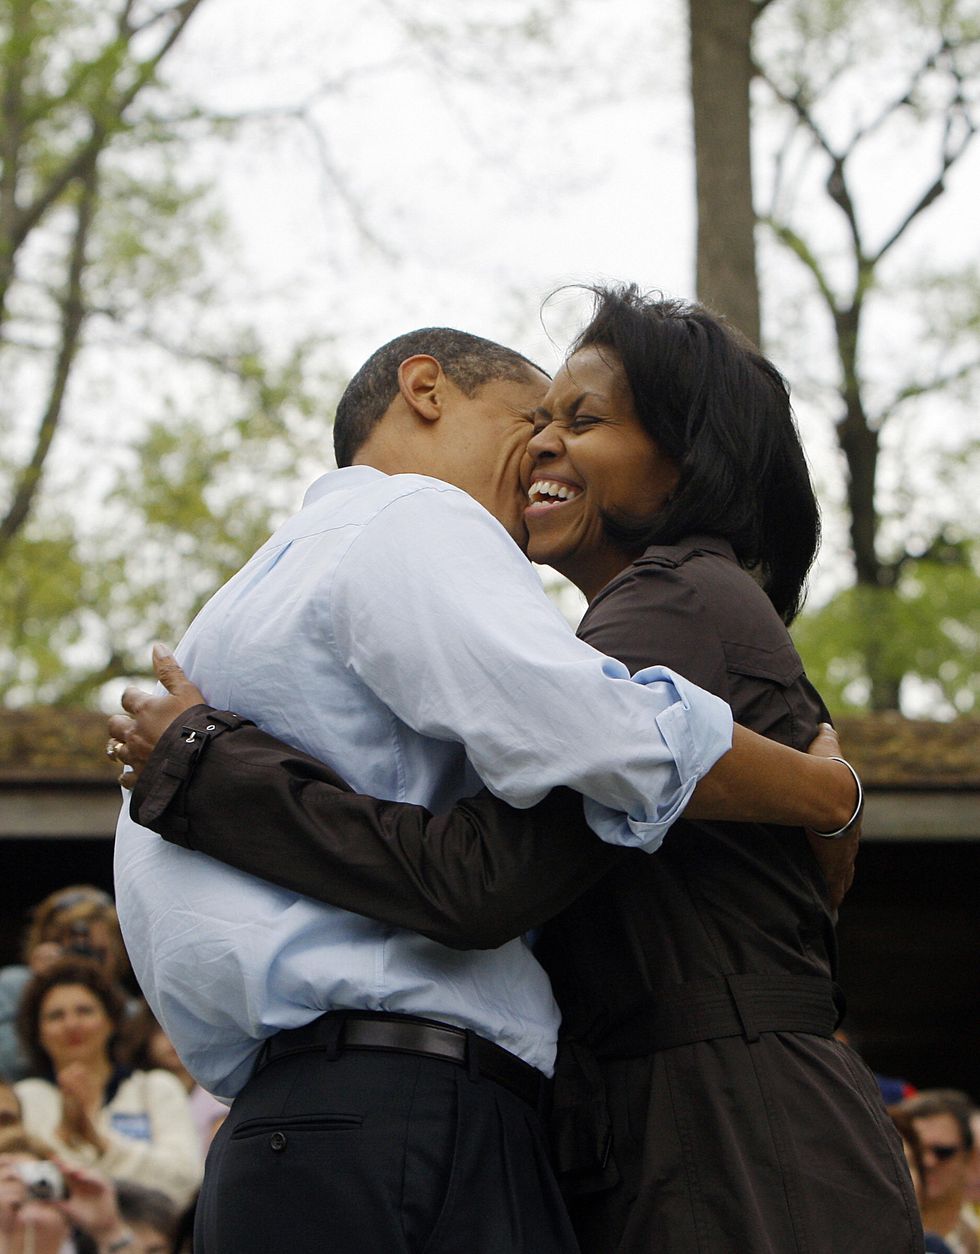 democratic presidential candidate us senator barack obama hugs his wife michelle while meeting families during a picnic at a park in noblesville, indiana, may 03, 2008  afp photoemmanuel dunand photo credit should read emmanuel dunandafp via getty images